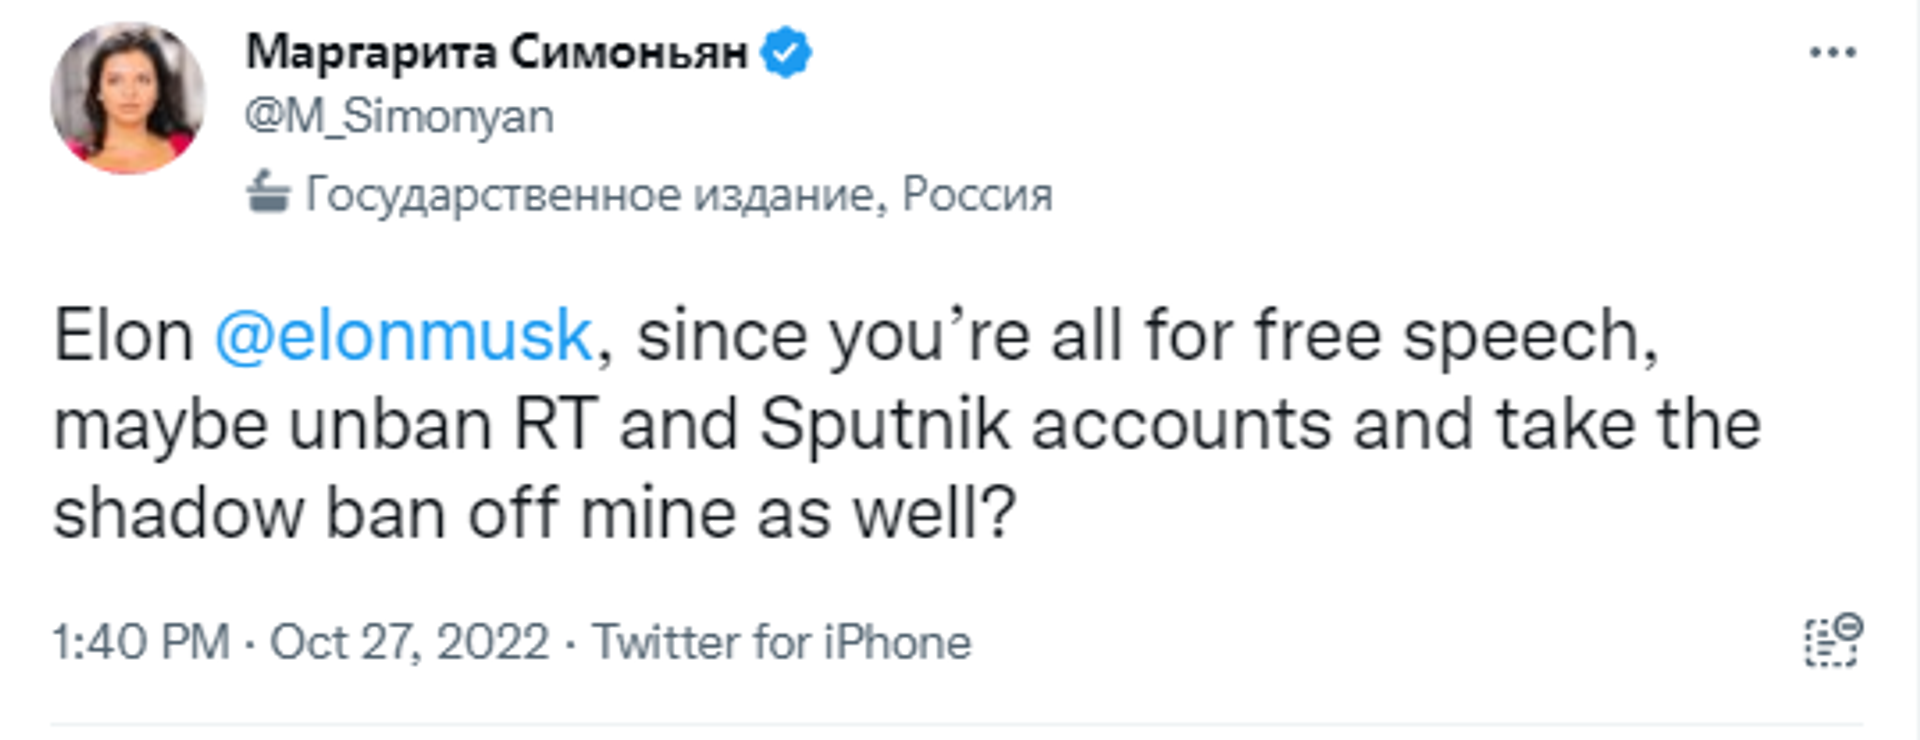 A screenshot of a Twitter post by Sputnik and RT Editor-in-Chief Margarita Simonyan, regarding the possible lift of restrictions against Russian media on Twitter under Elon Musk. - Sputnik International, 1920, 28.10.2022